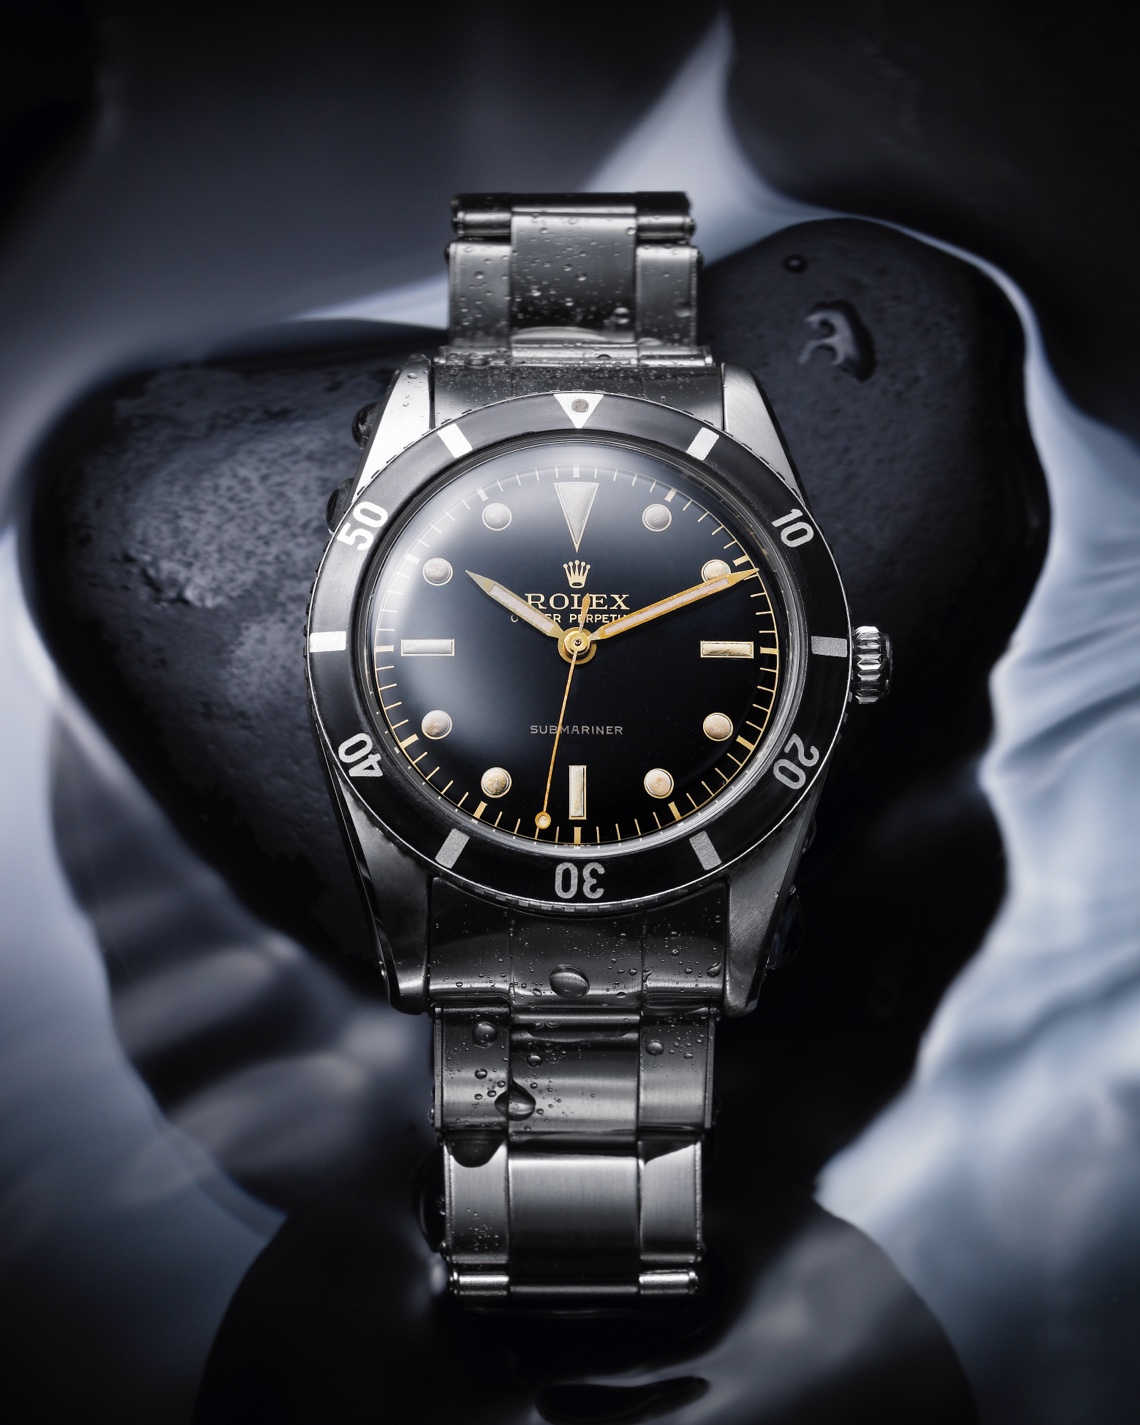 Rolex Oyster Perpetual Submariner negro